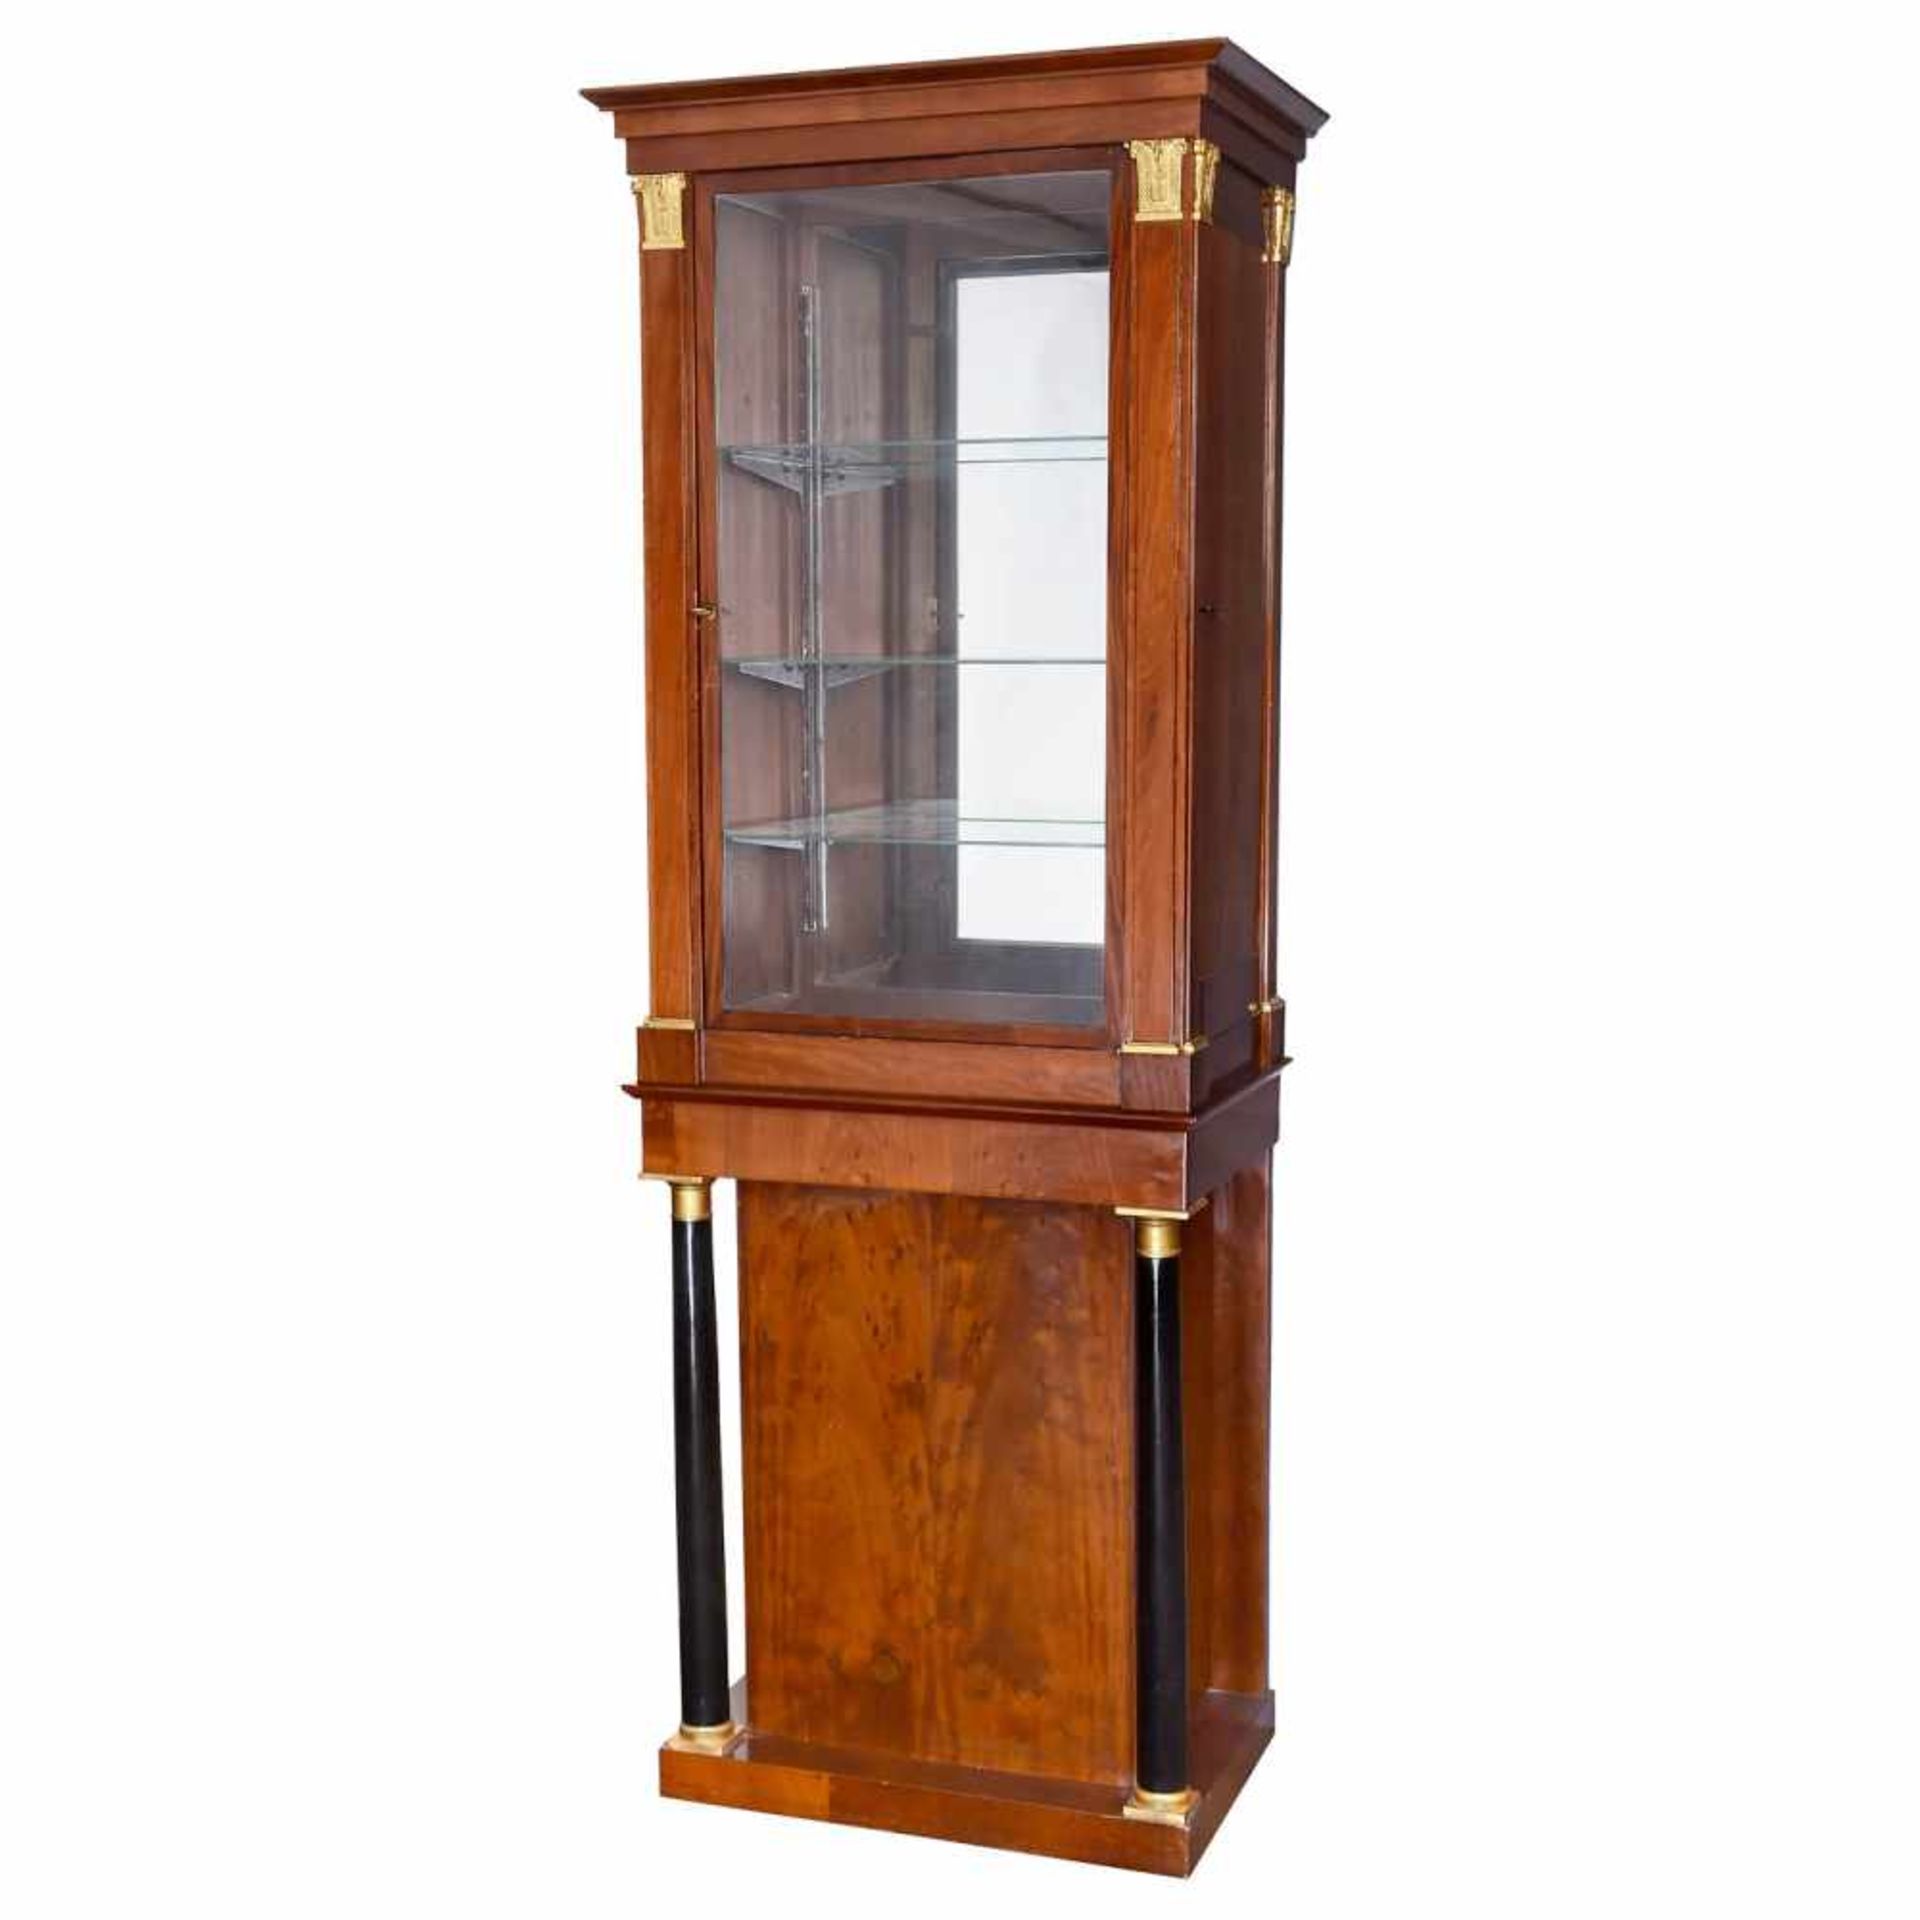 Large Flute Clock Case, c. 1820Solid and veneered cherry wood case, columns with gilt brass capitals